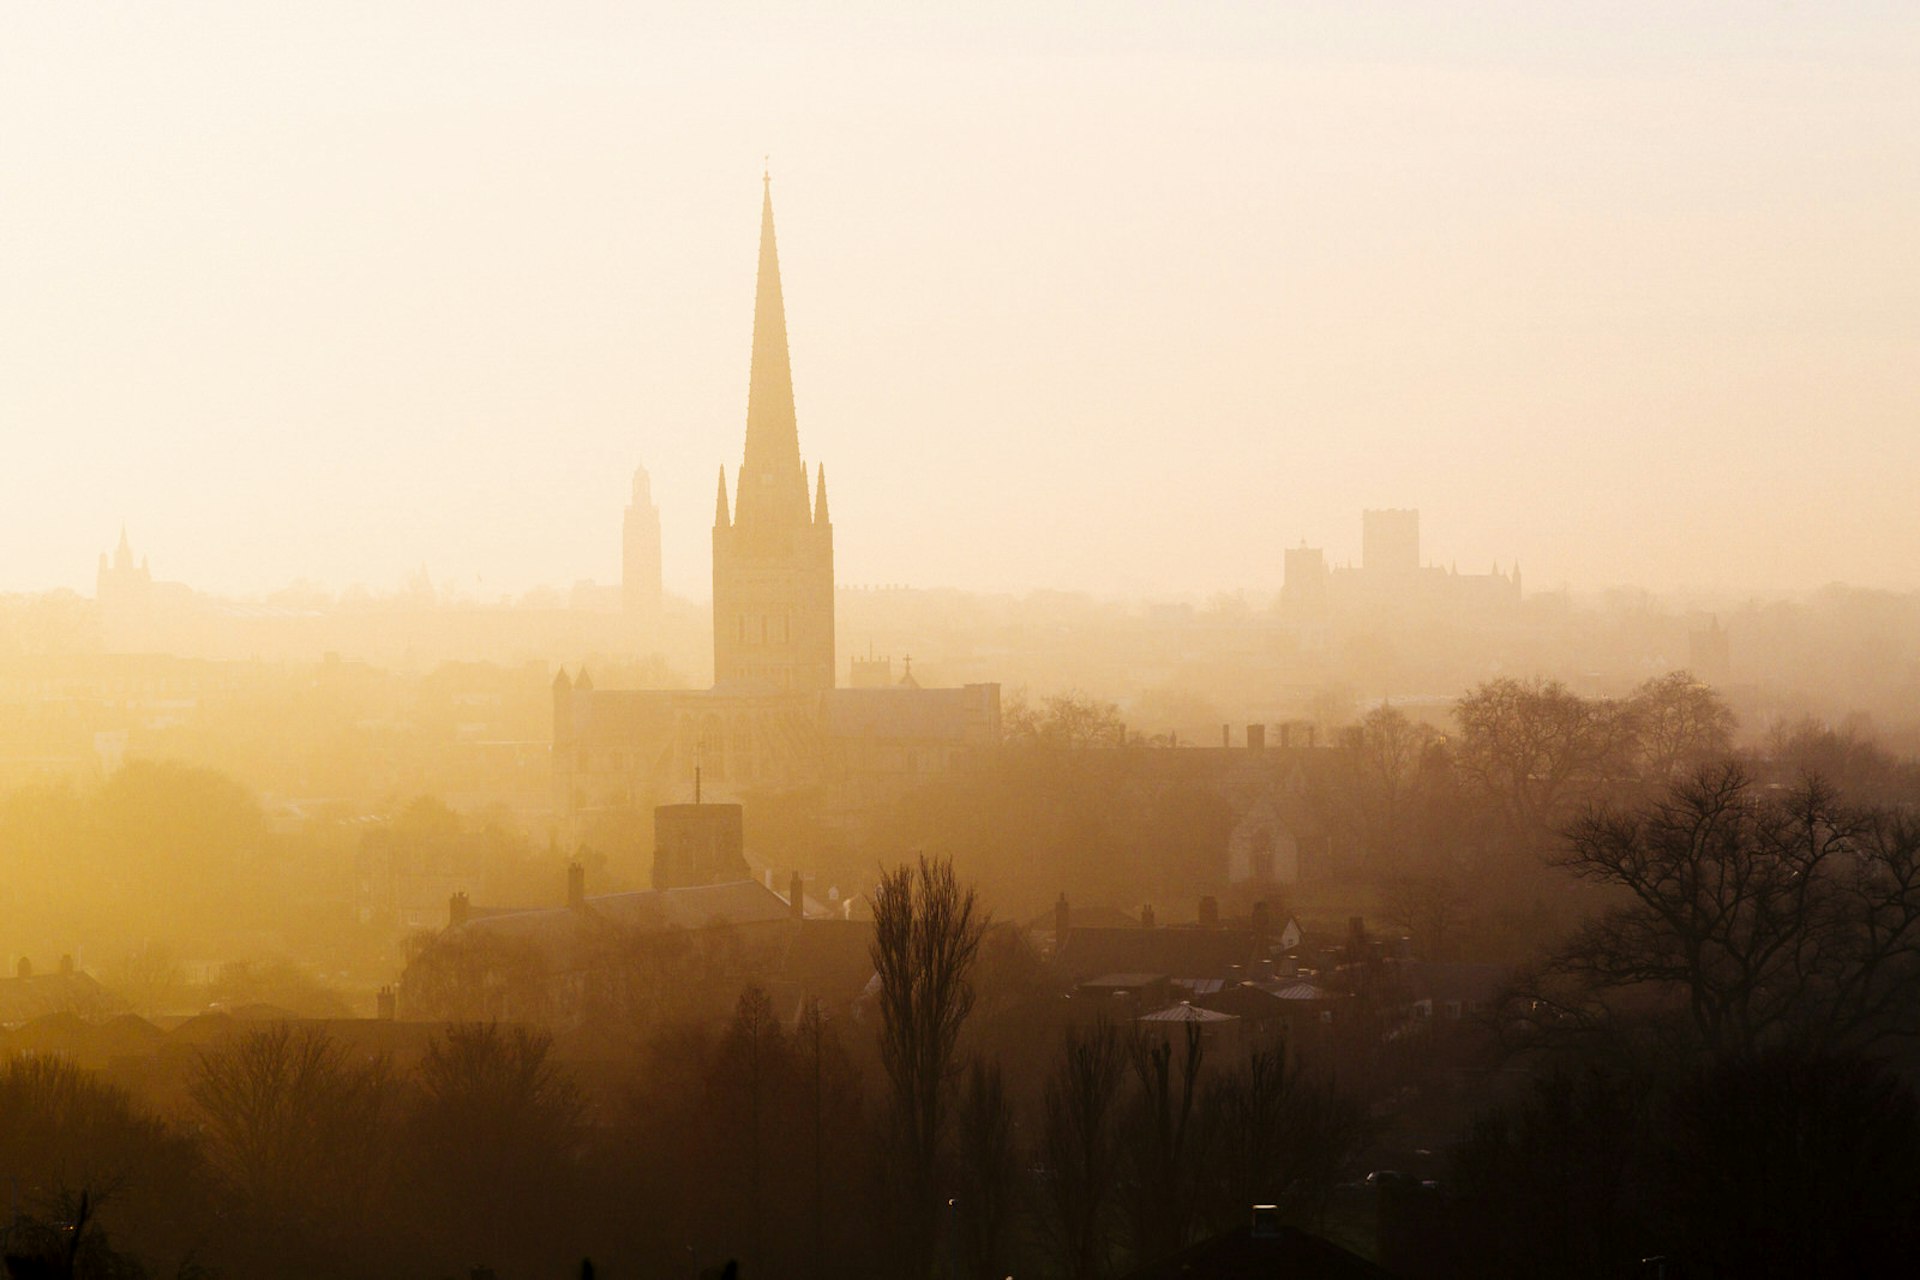 The silhouette of Norwich Cathedral's tower in mist, as seen from Kett's Heights.